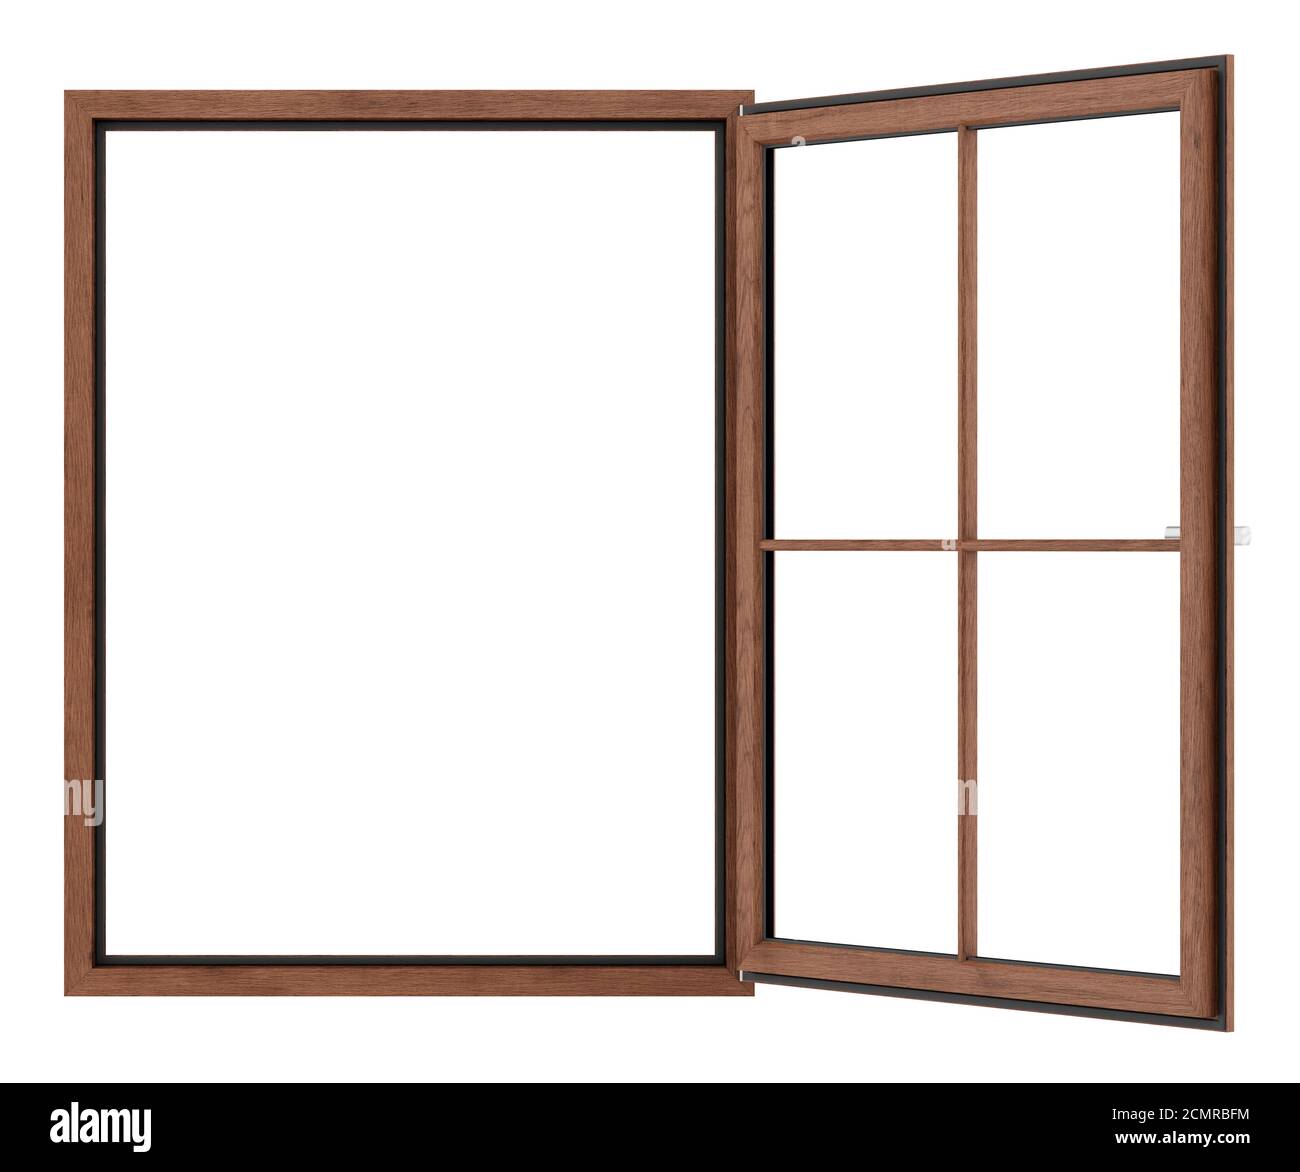 open wooden window isolated on white background Stock Photo